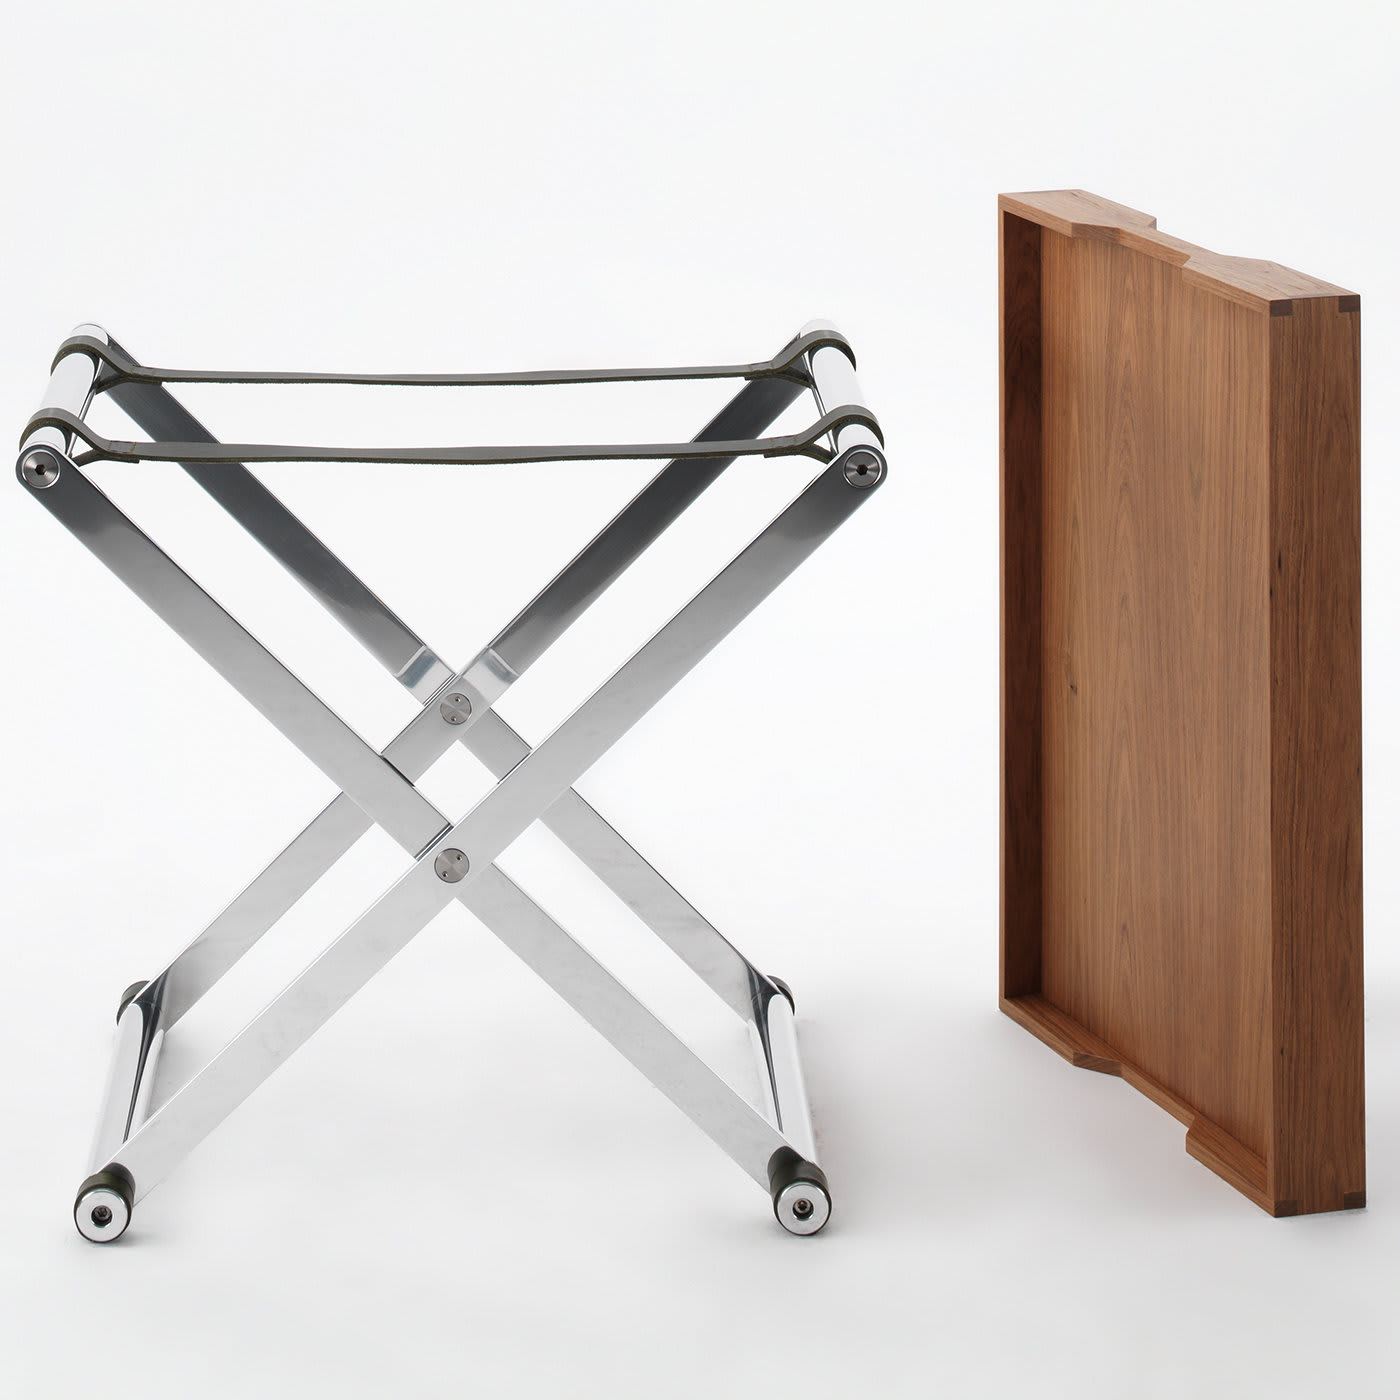 Luxe Foldable Table ☞ Material: Iroko Wood